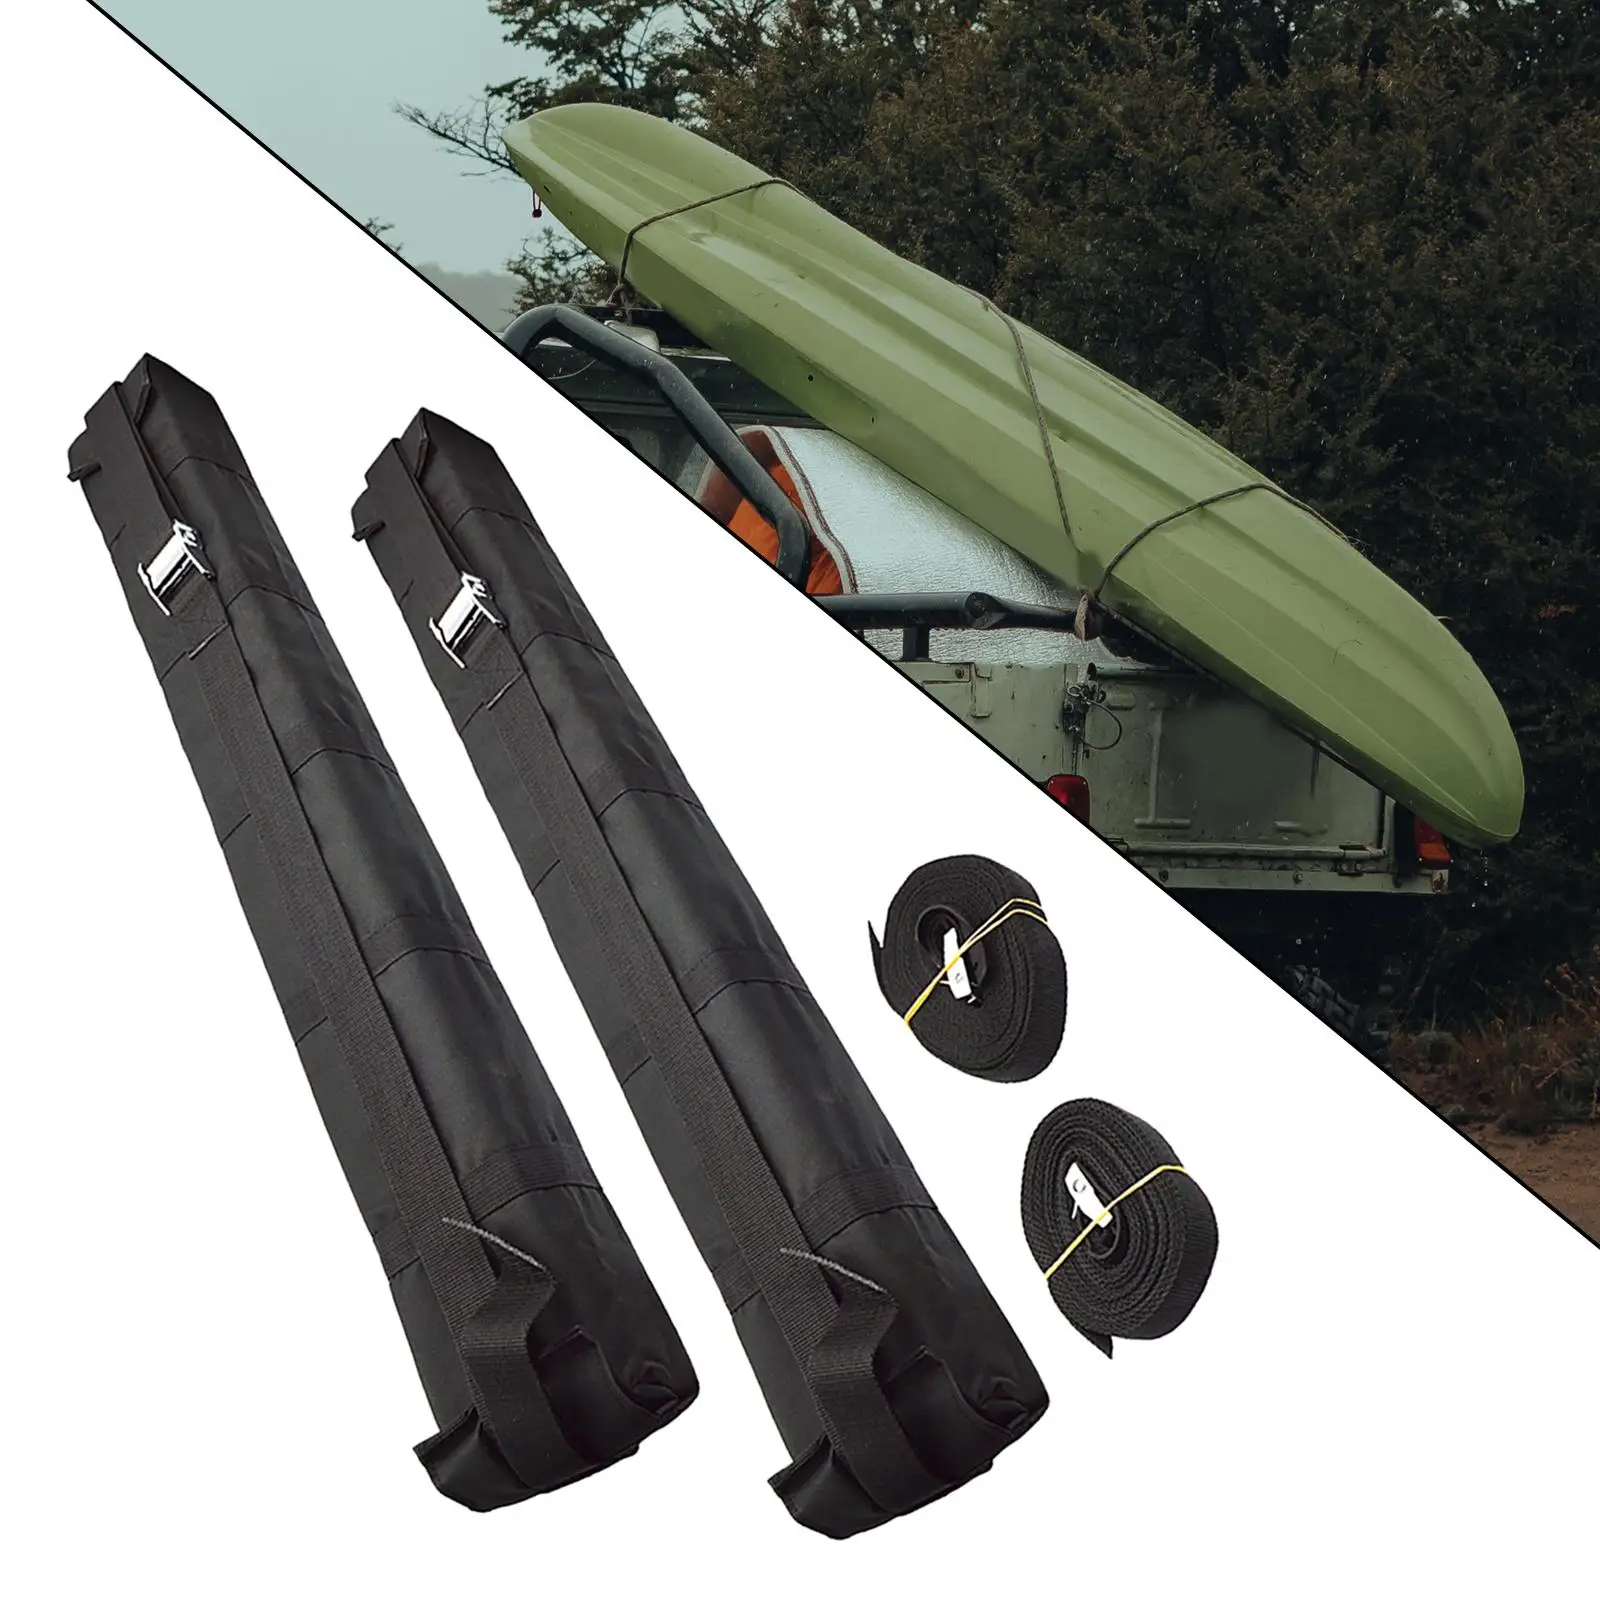 Kayak Roof Rack Pads Universal Car Soft Roof Rack with Tie Down Straps for Canoe Surfboard Paddleboard Snowboard Water Sports